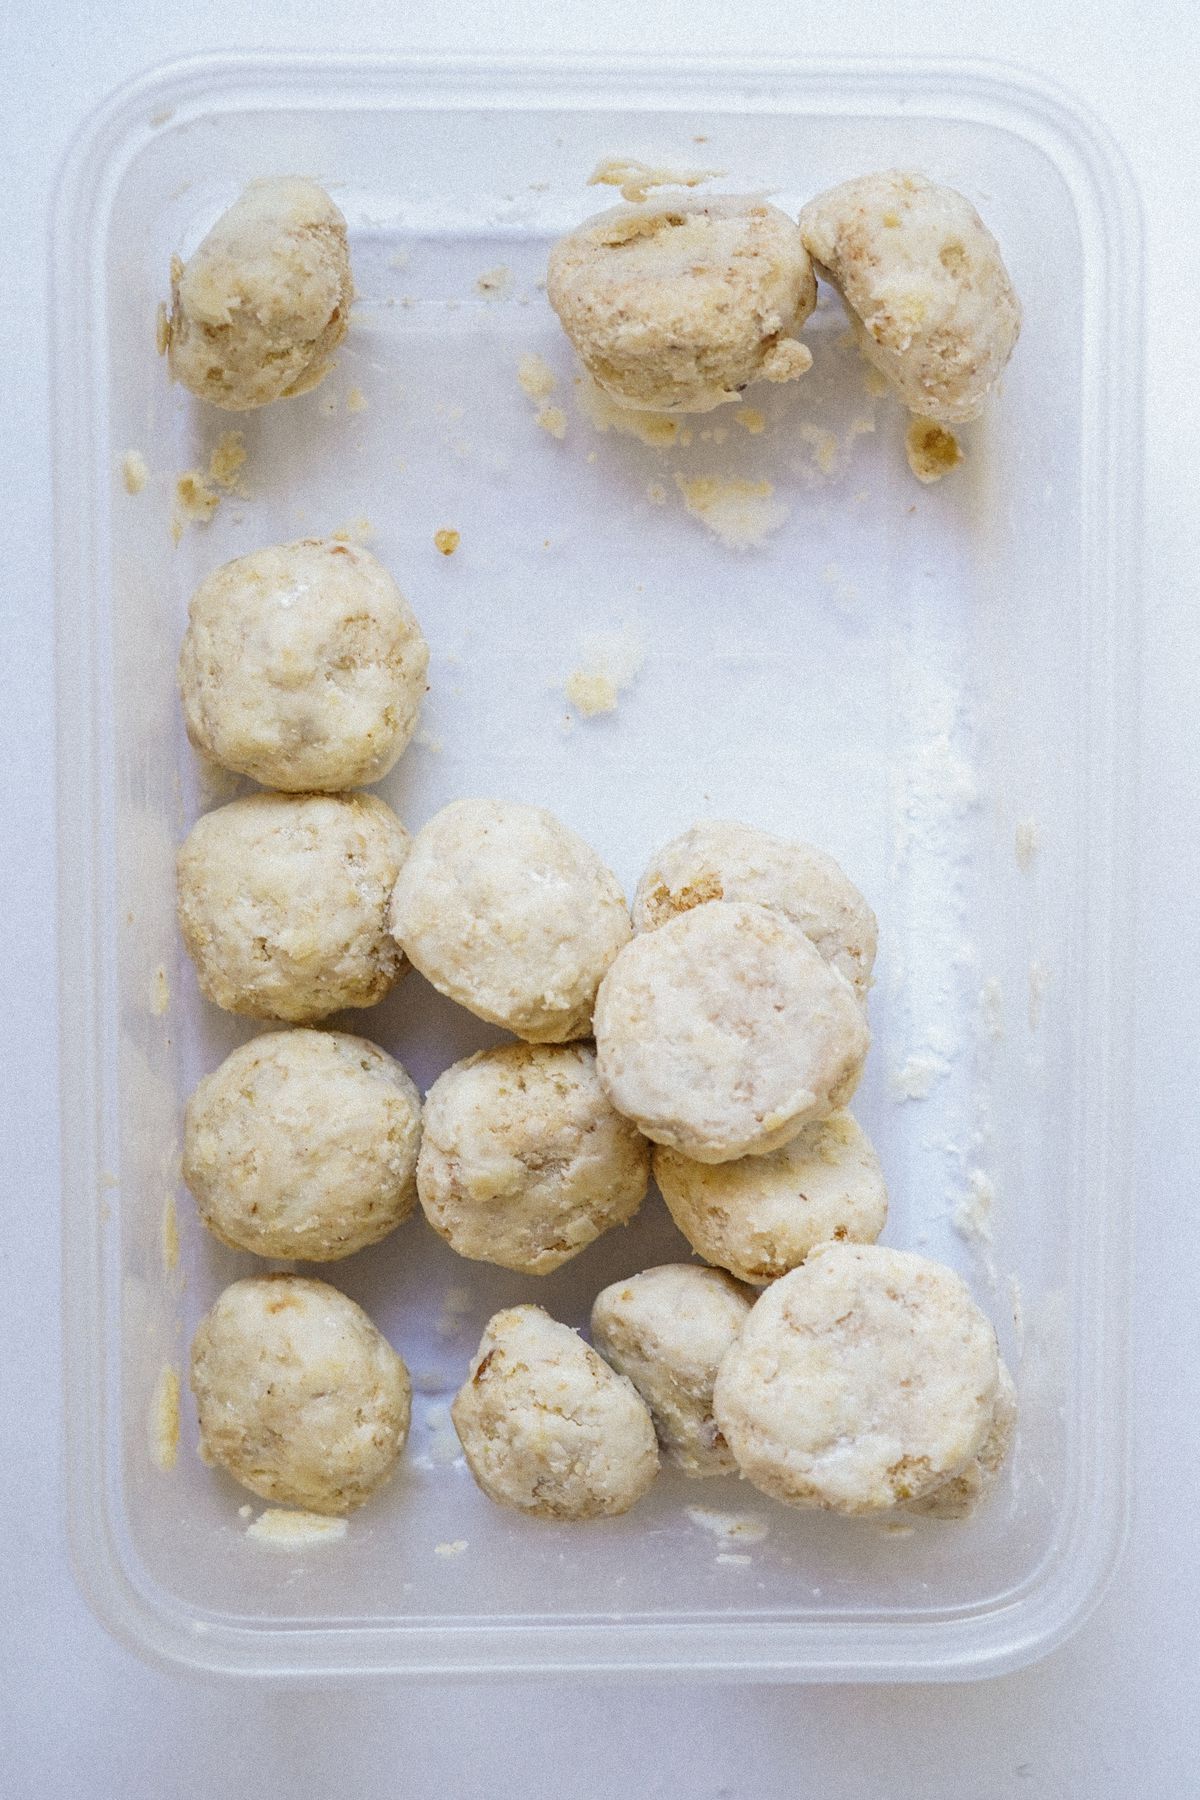 Small round Mexican wedding cookies inside a clear Tupperware.